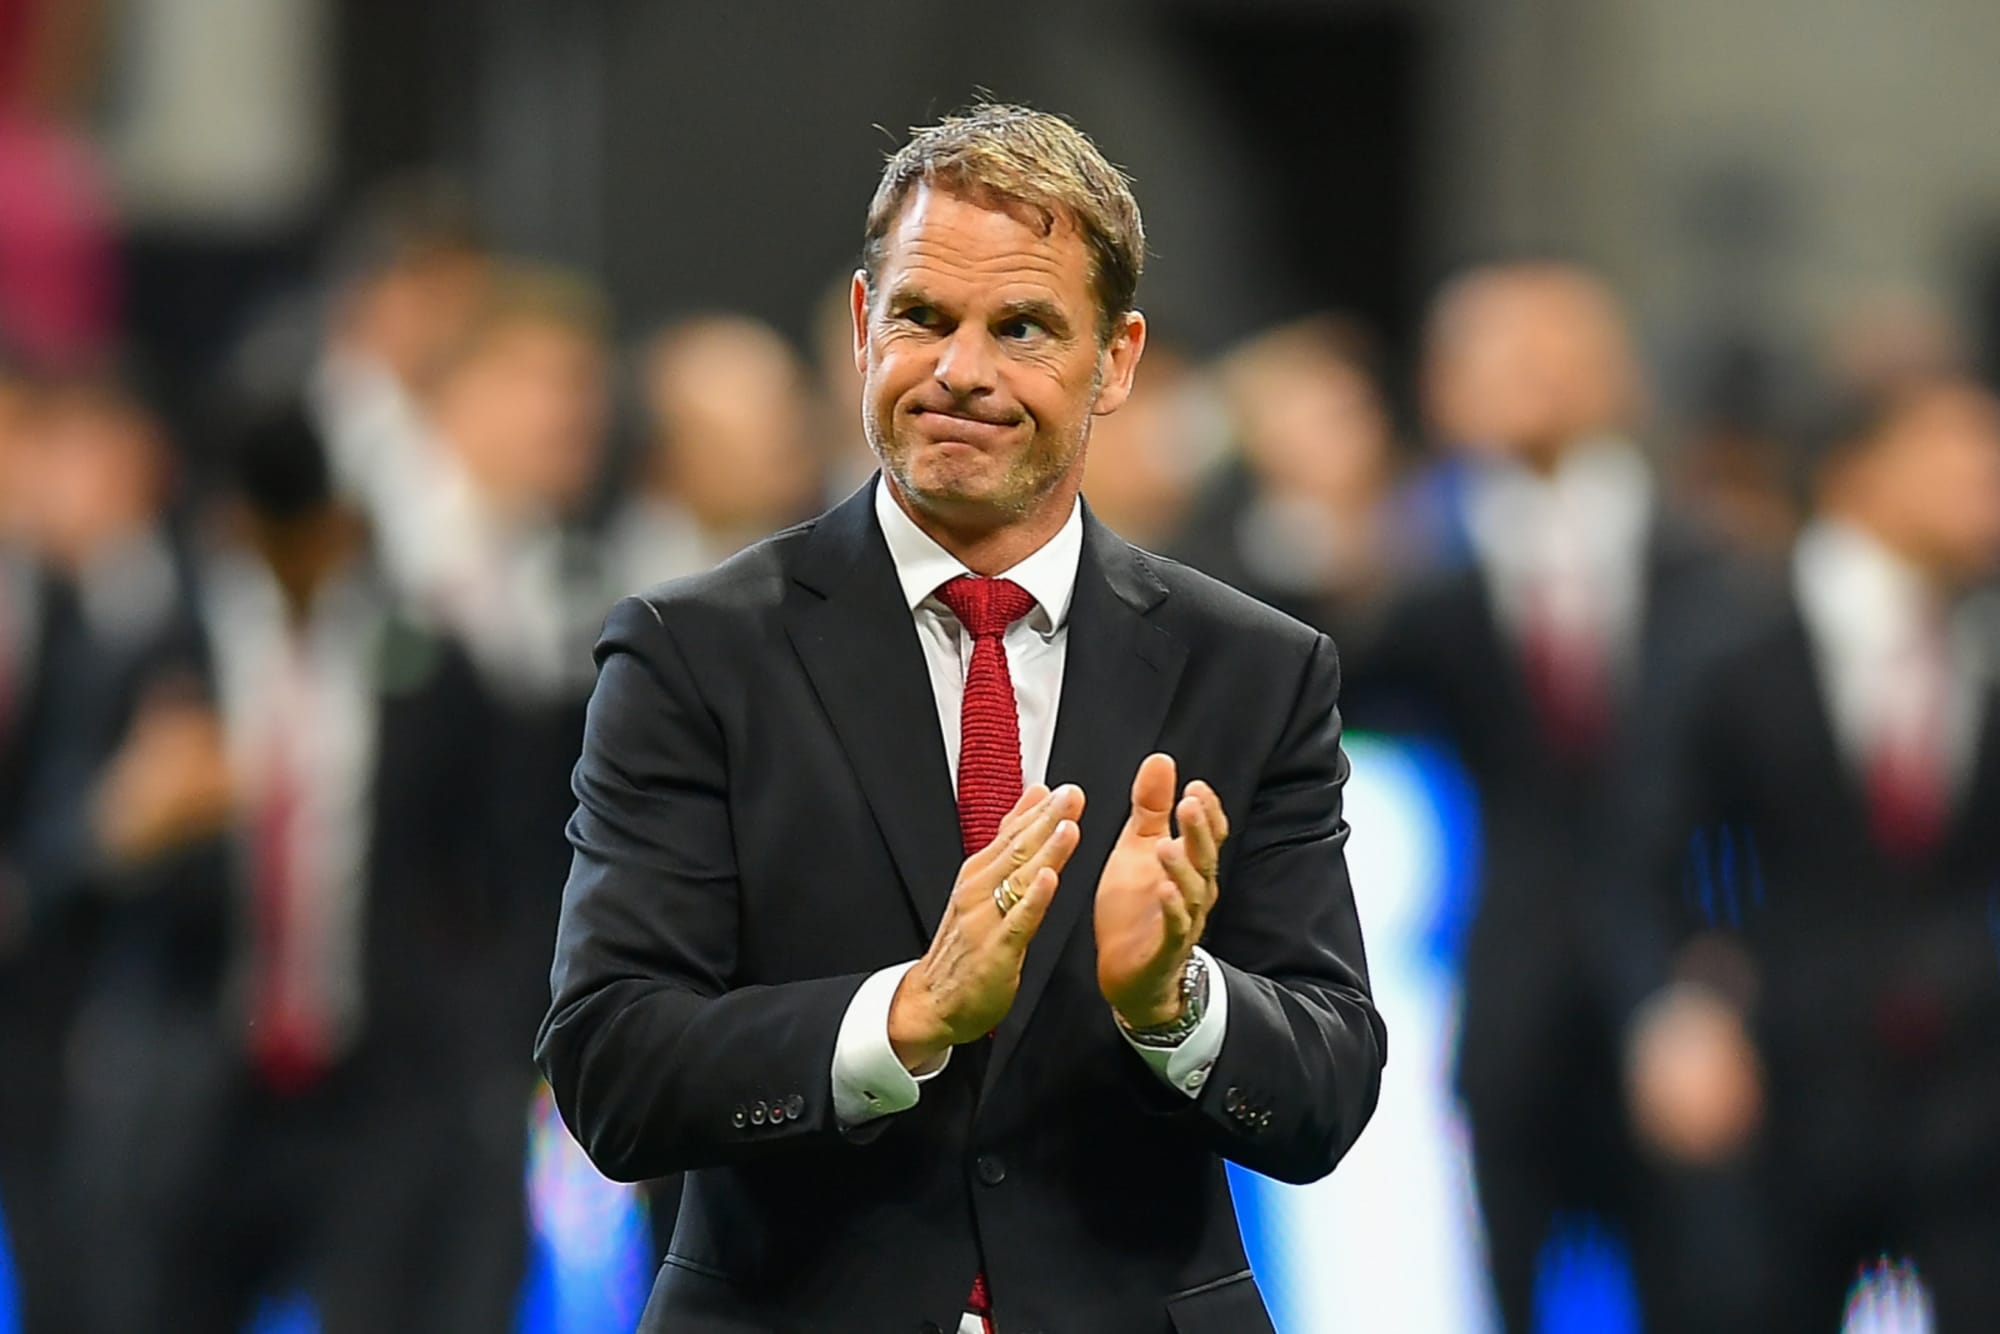 The island is approached by the Dutchman Frank de Boer